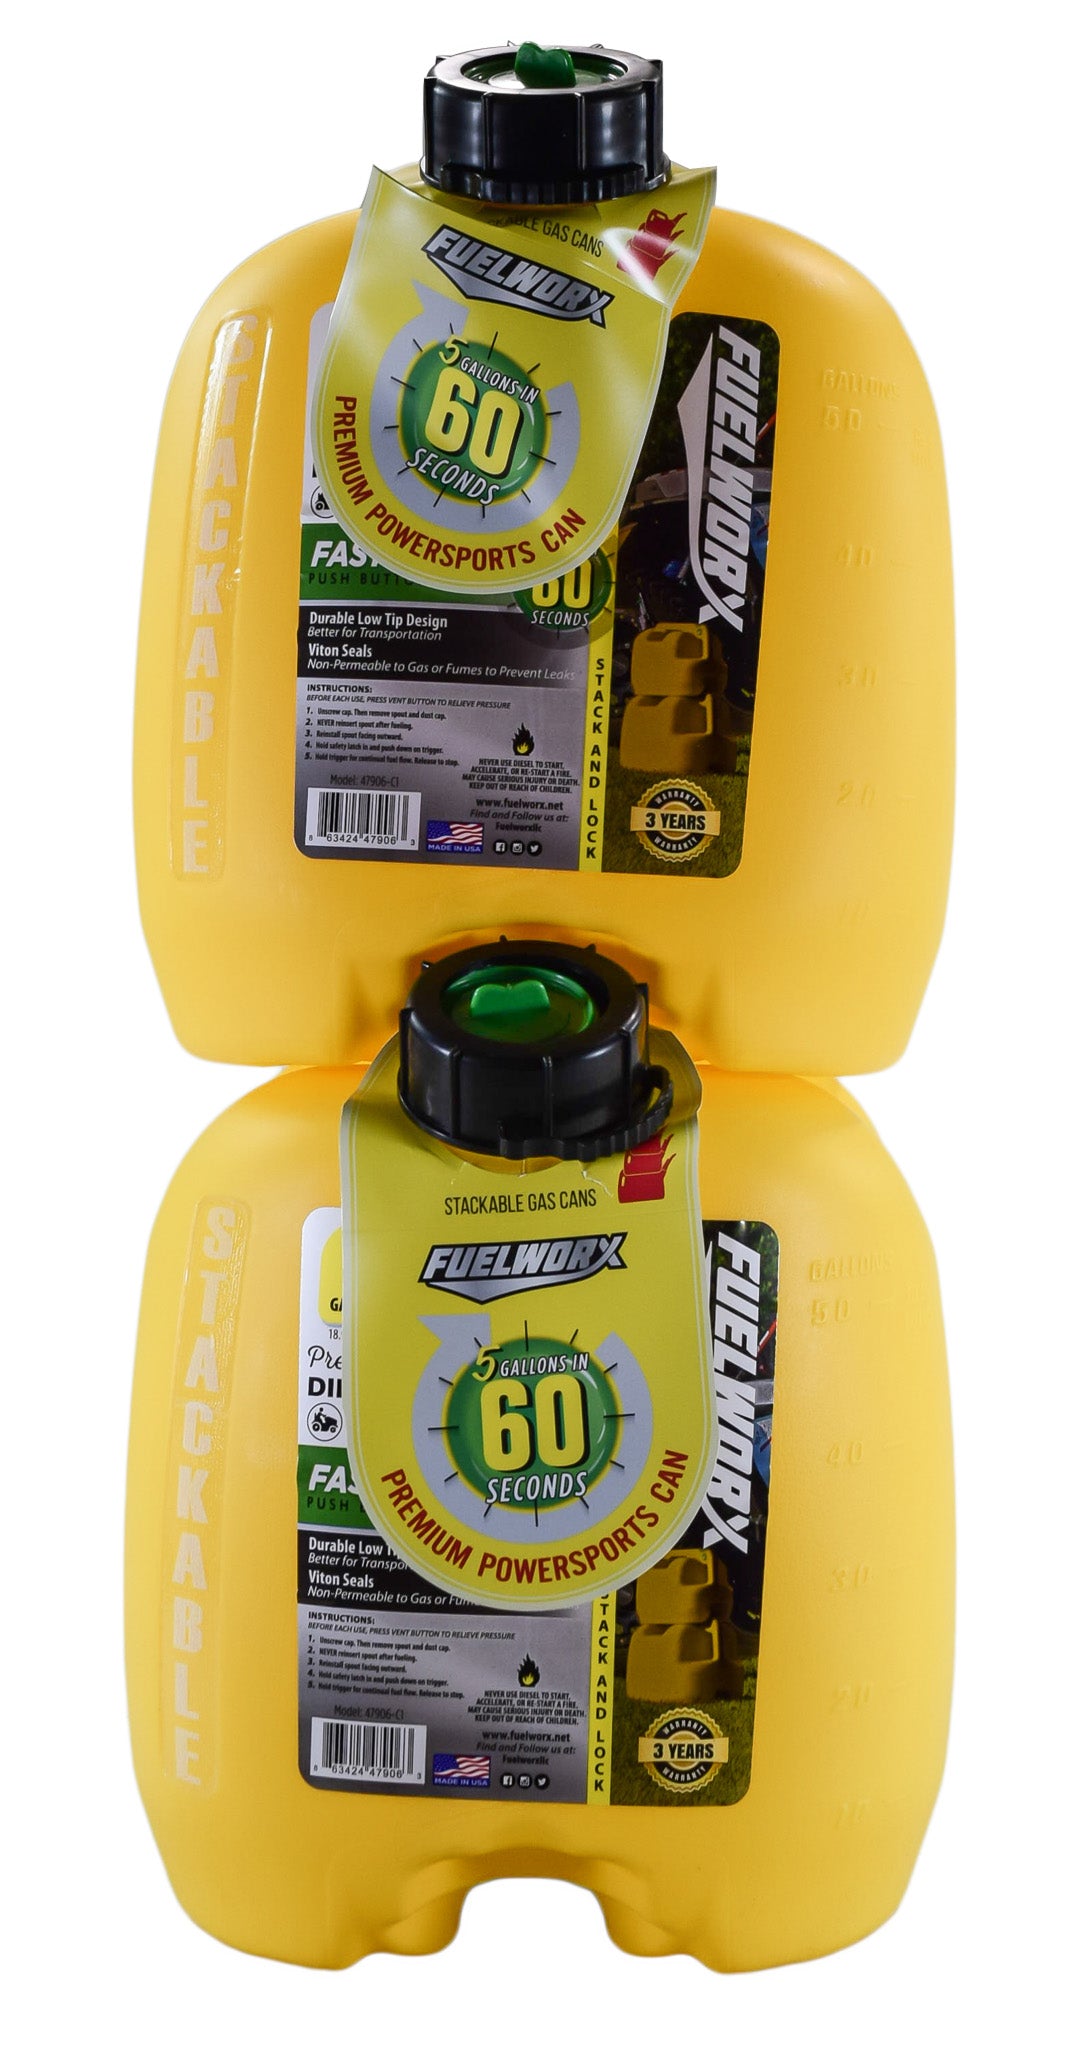 Fuelworx Yellow 5 Gallon Stackable Fast Pour Diesel Fuel Cans CARB Compliant Made in The USA (5 Gallon Diesel Cans 2-Pack)